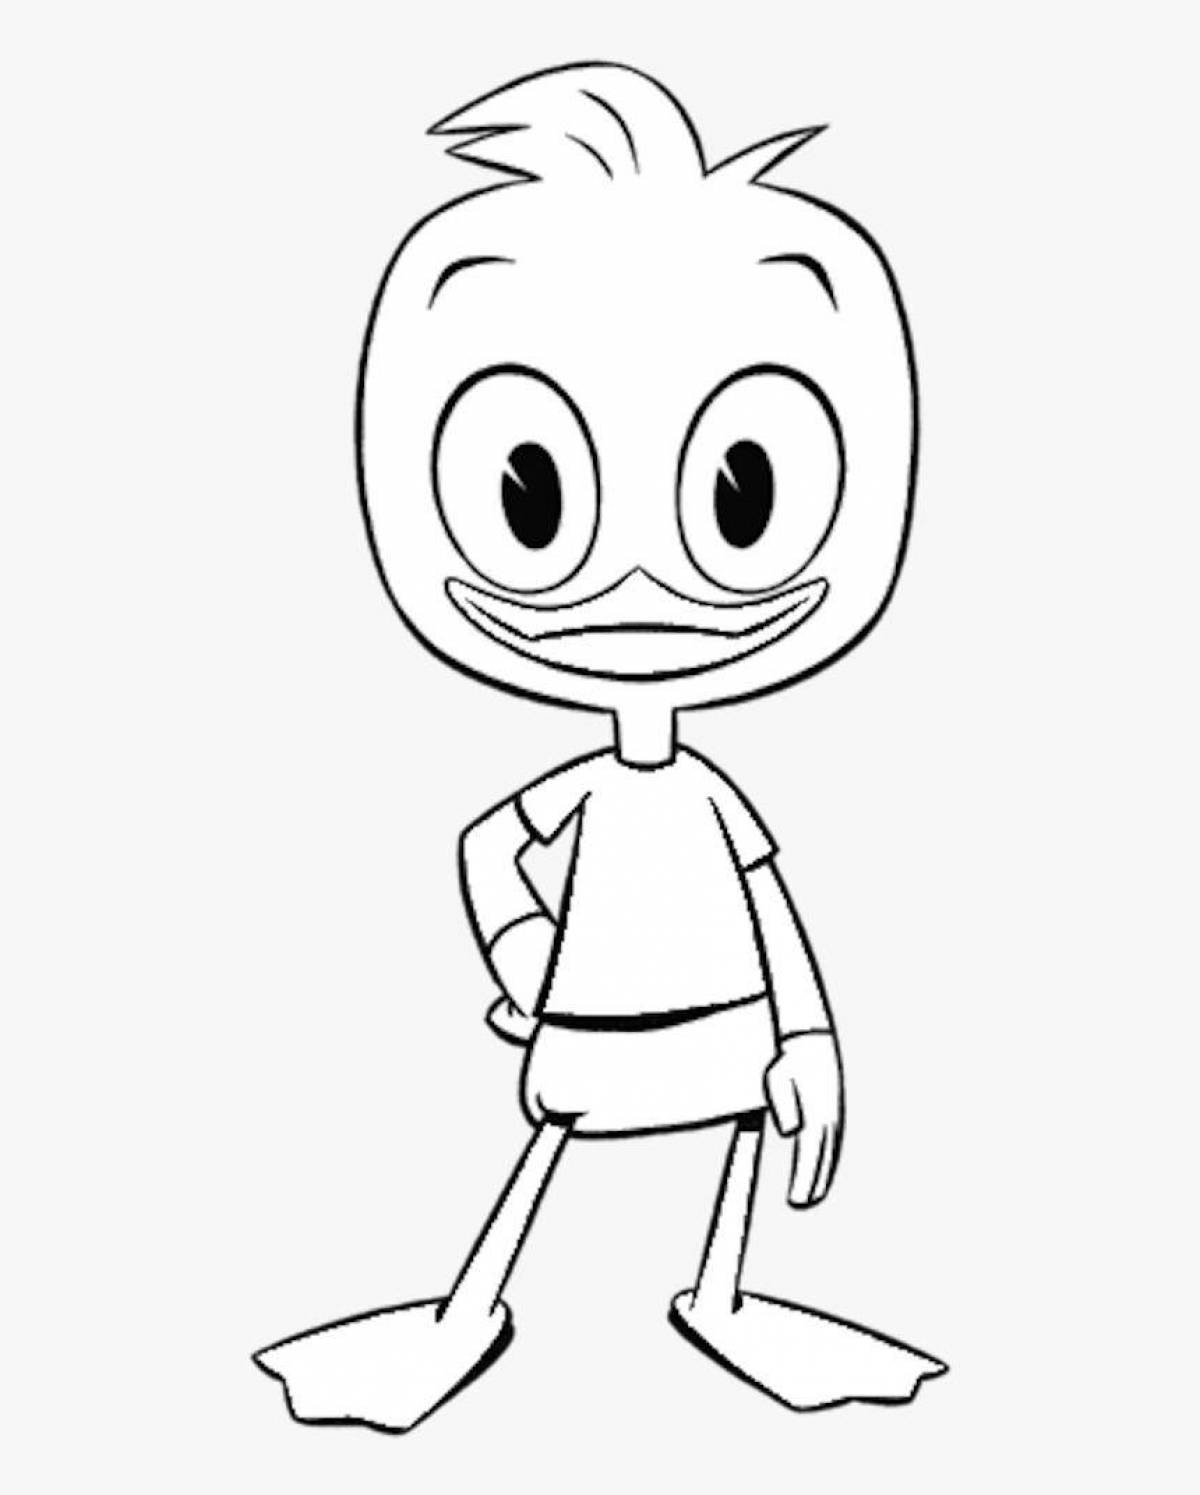 Waddling duck coloring page